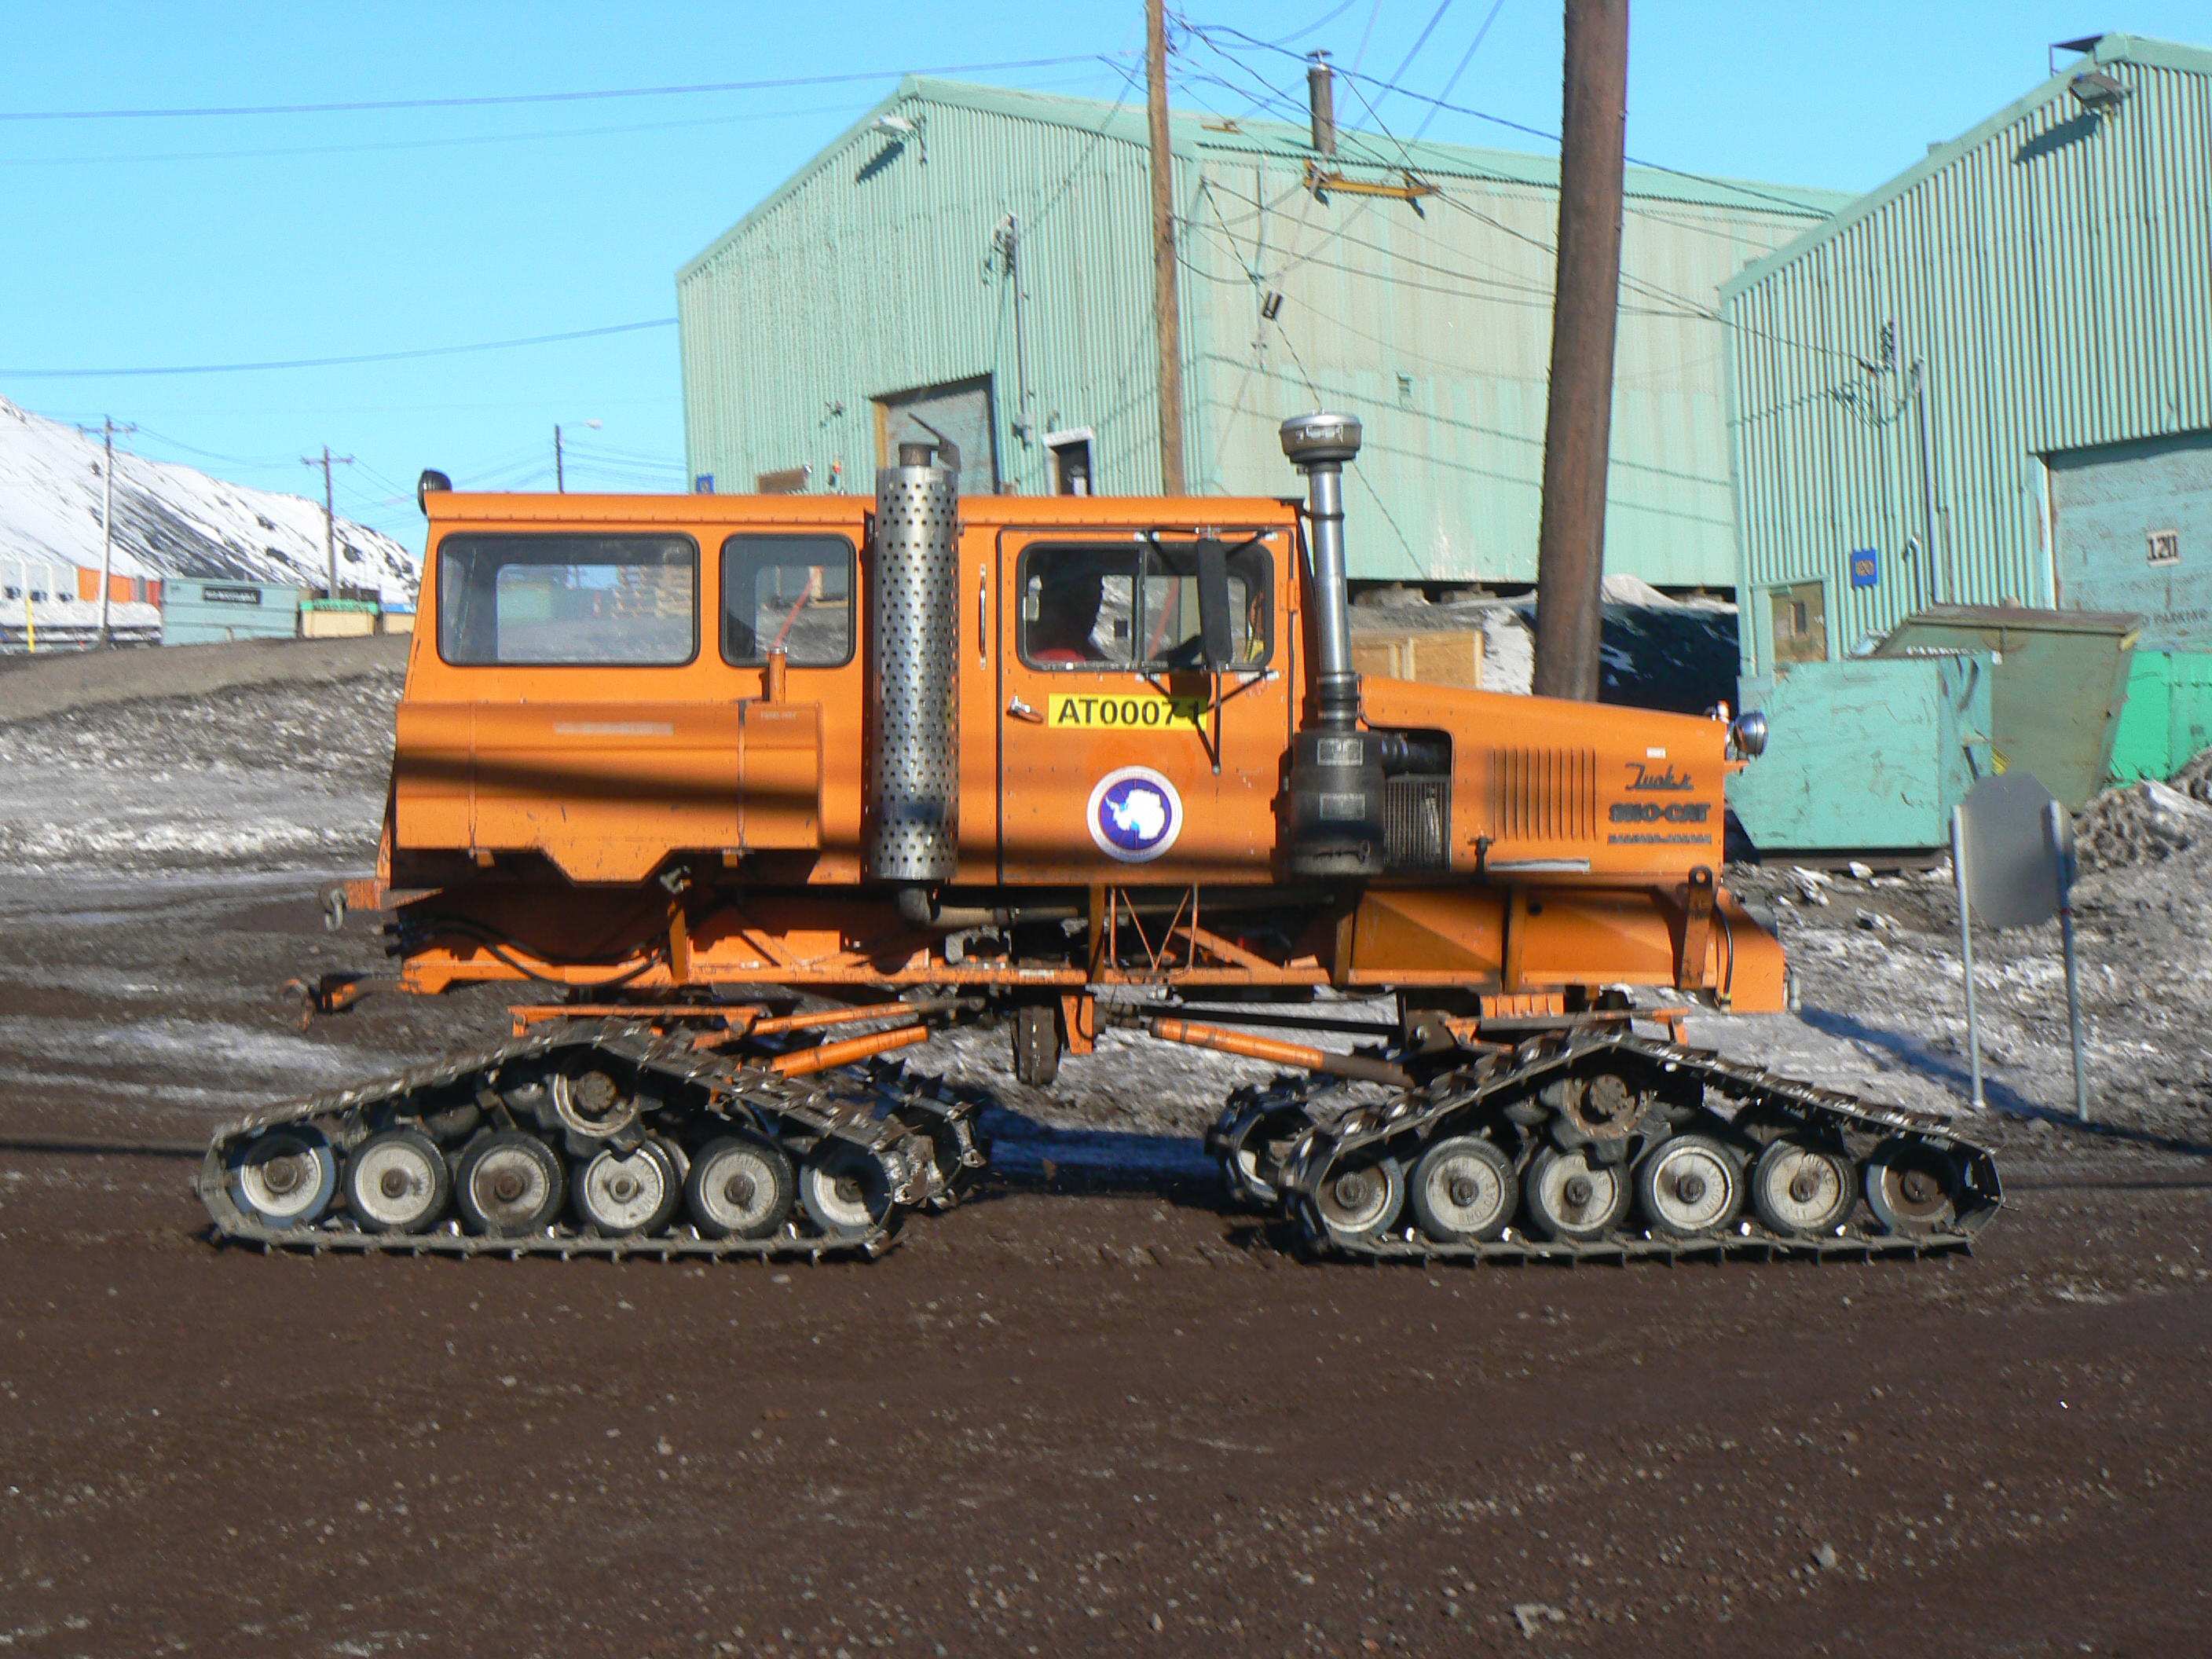 A large tracked vehicle.